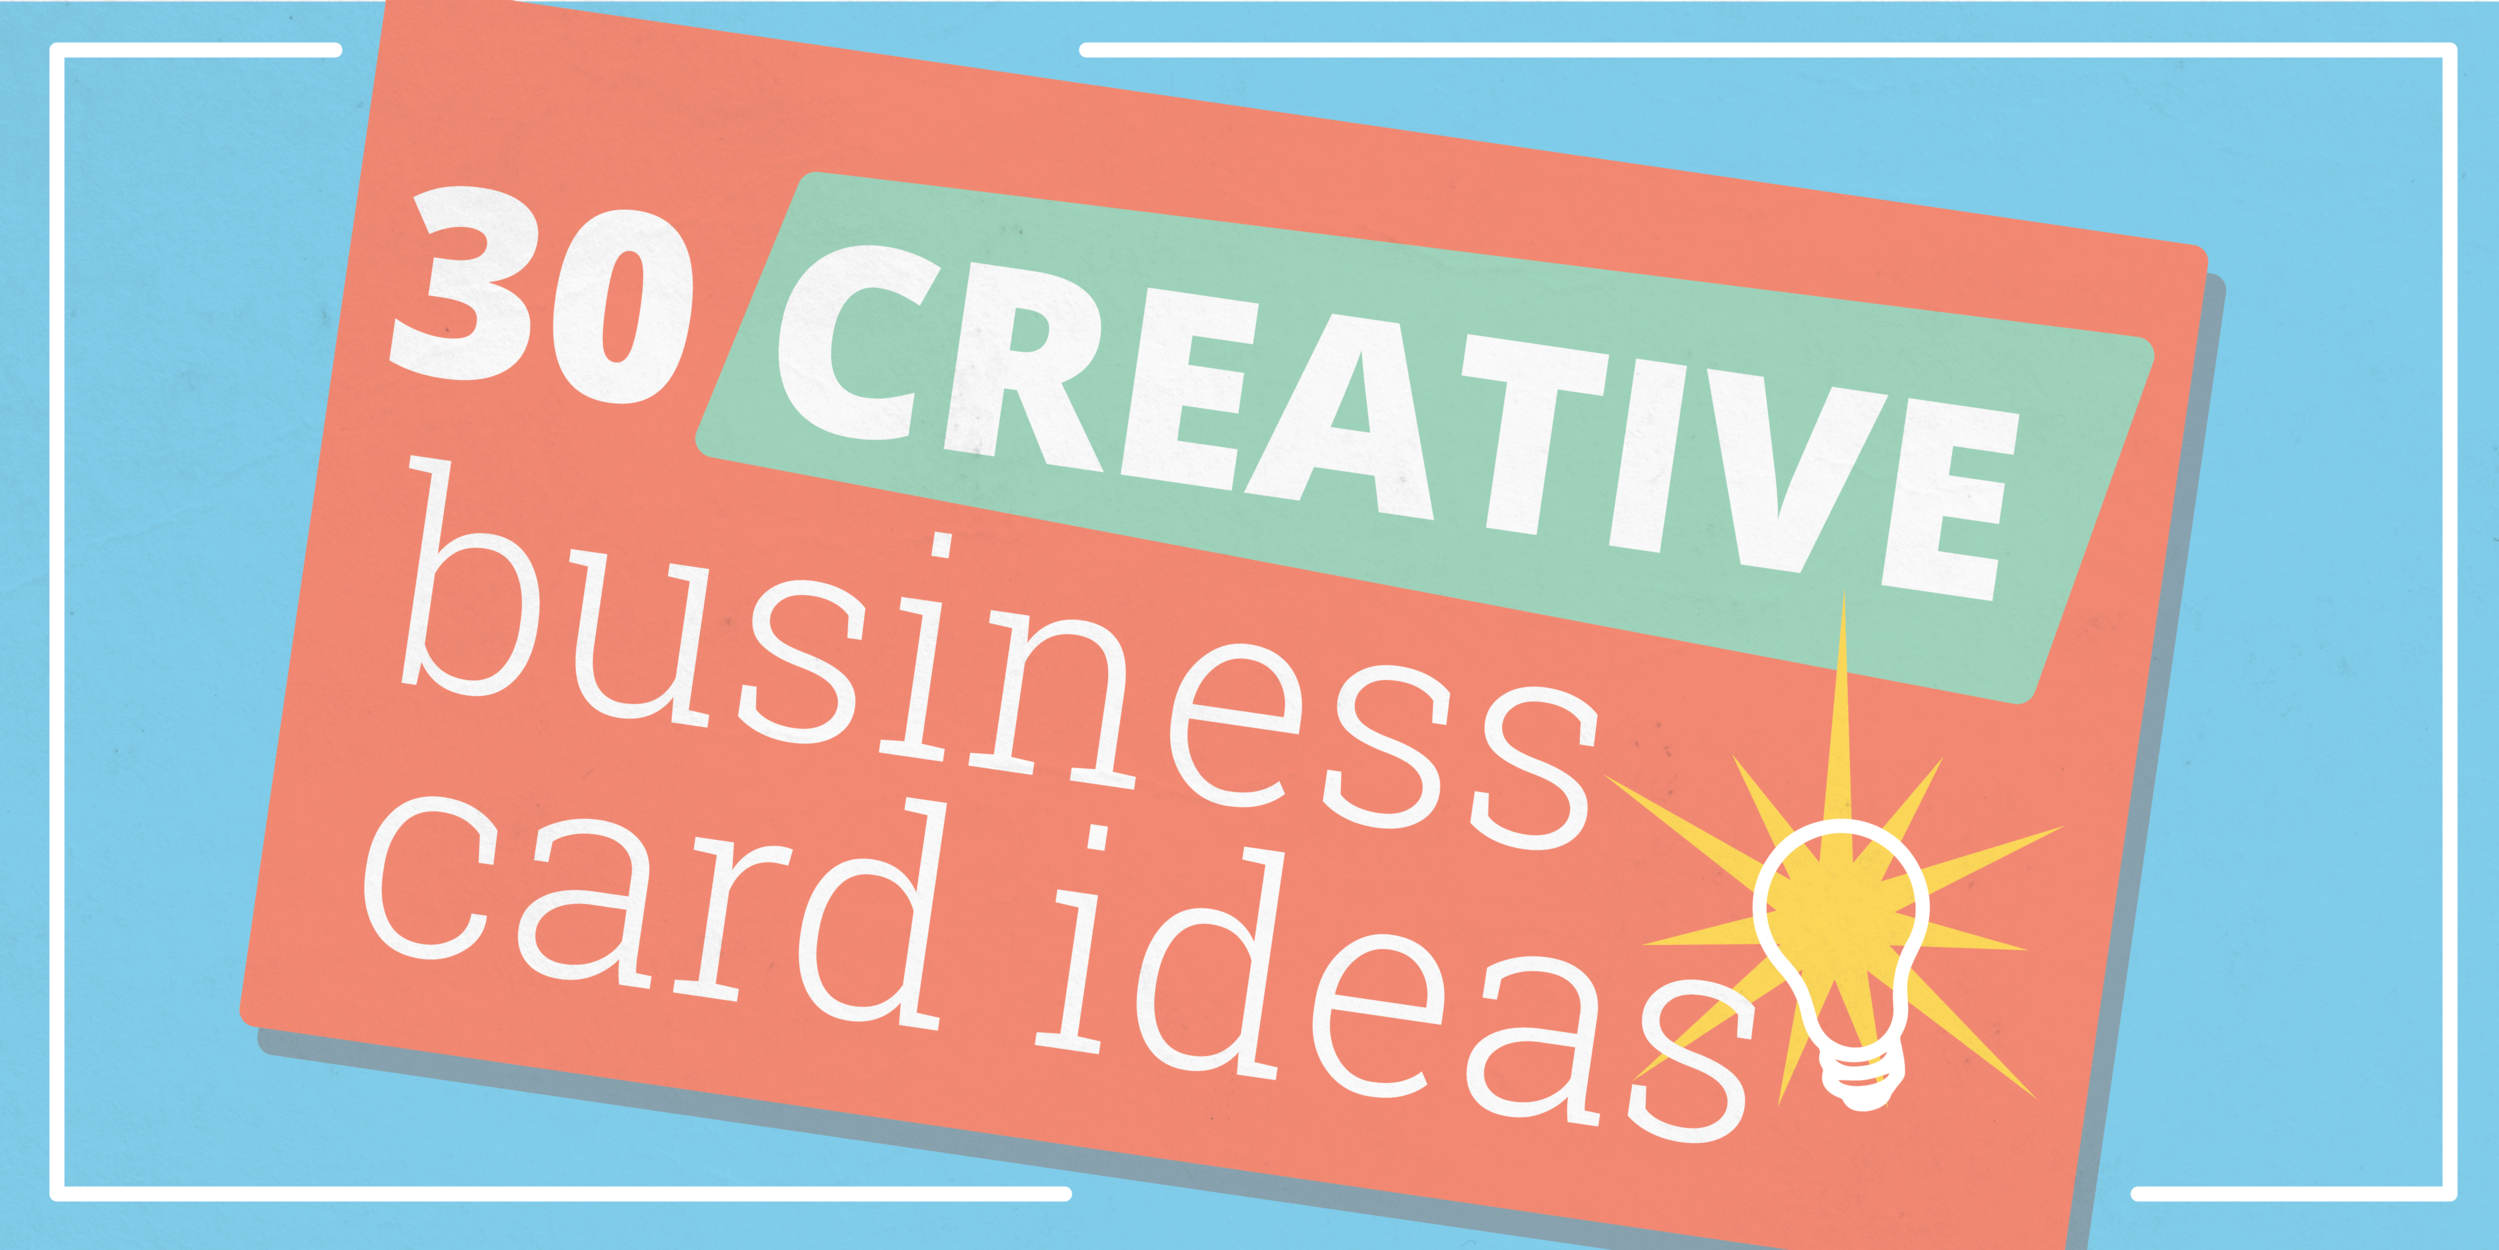 30 Creative Business Card Ideas & Designs | Lucidpress Within Business Cards For Teachers Templates Free